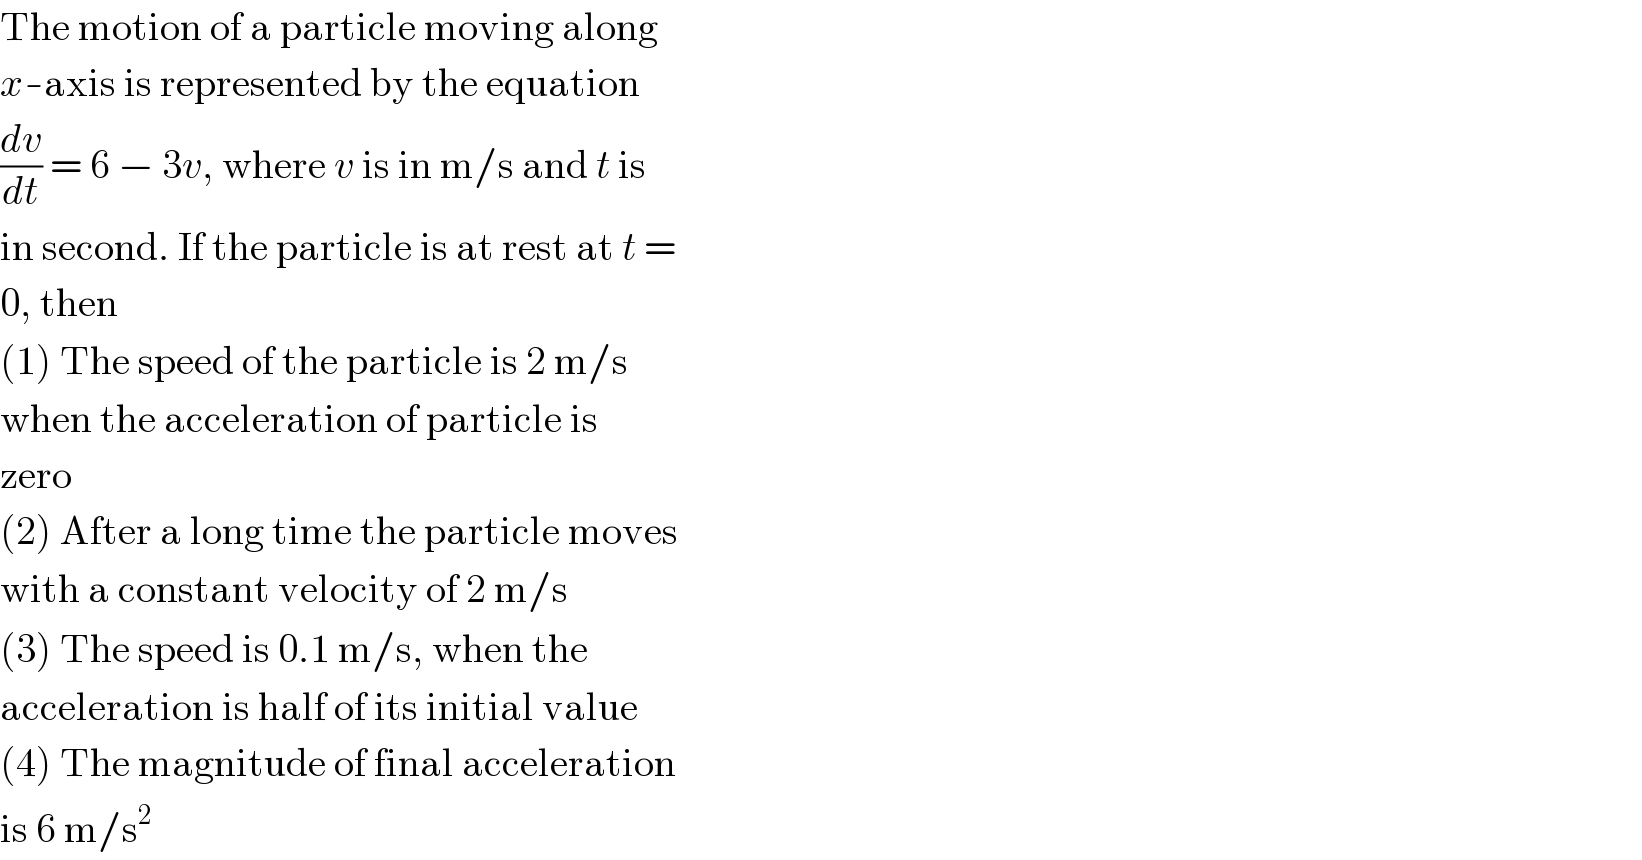 The motion of a particle moving along  x-axis is represented by the equation  (dv/dt) = 6 − 3v, where v is in m/s and t is  in second. If the particle is at rest at t =  0, then  (1) The speed of the particle is 2 m/s  when the acceleration of particle is  zero  (2) After a long time the particle moves  with a constant velocity of 2 m/s  (3) The speed is 0.1 m/s, when the  acceleration is half of its initial value  (4) The magnitude of final acceleration  is 6 m/s^2   